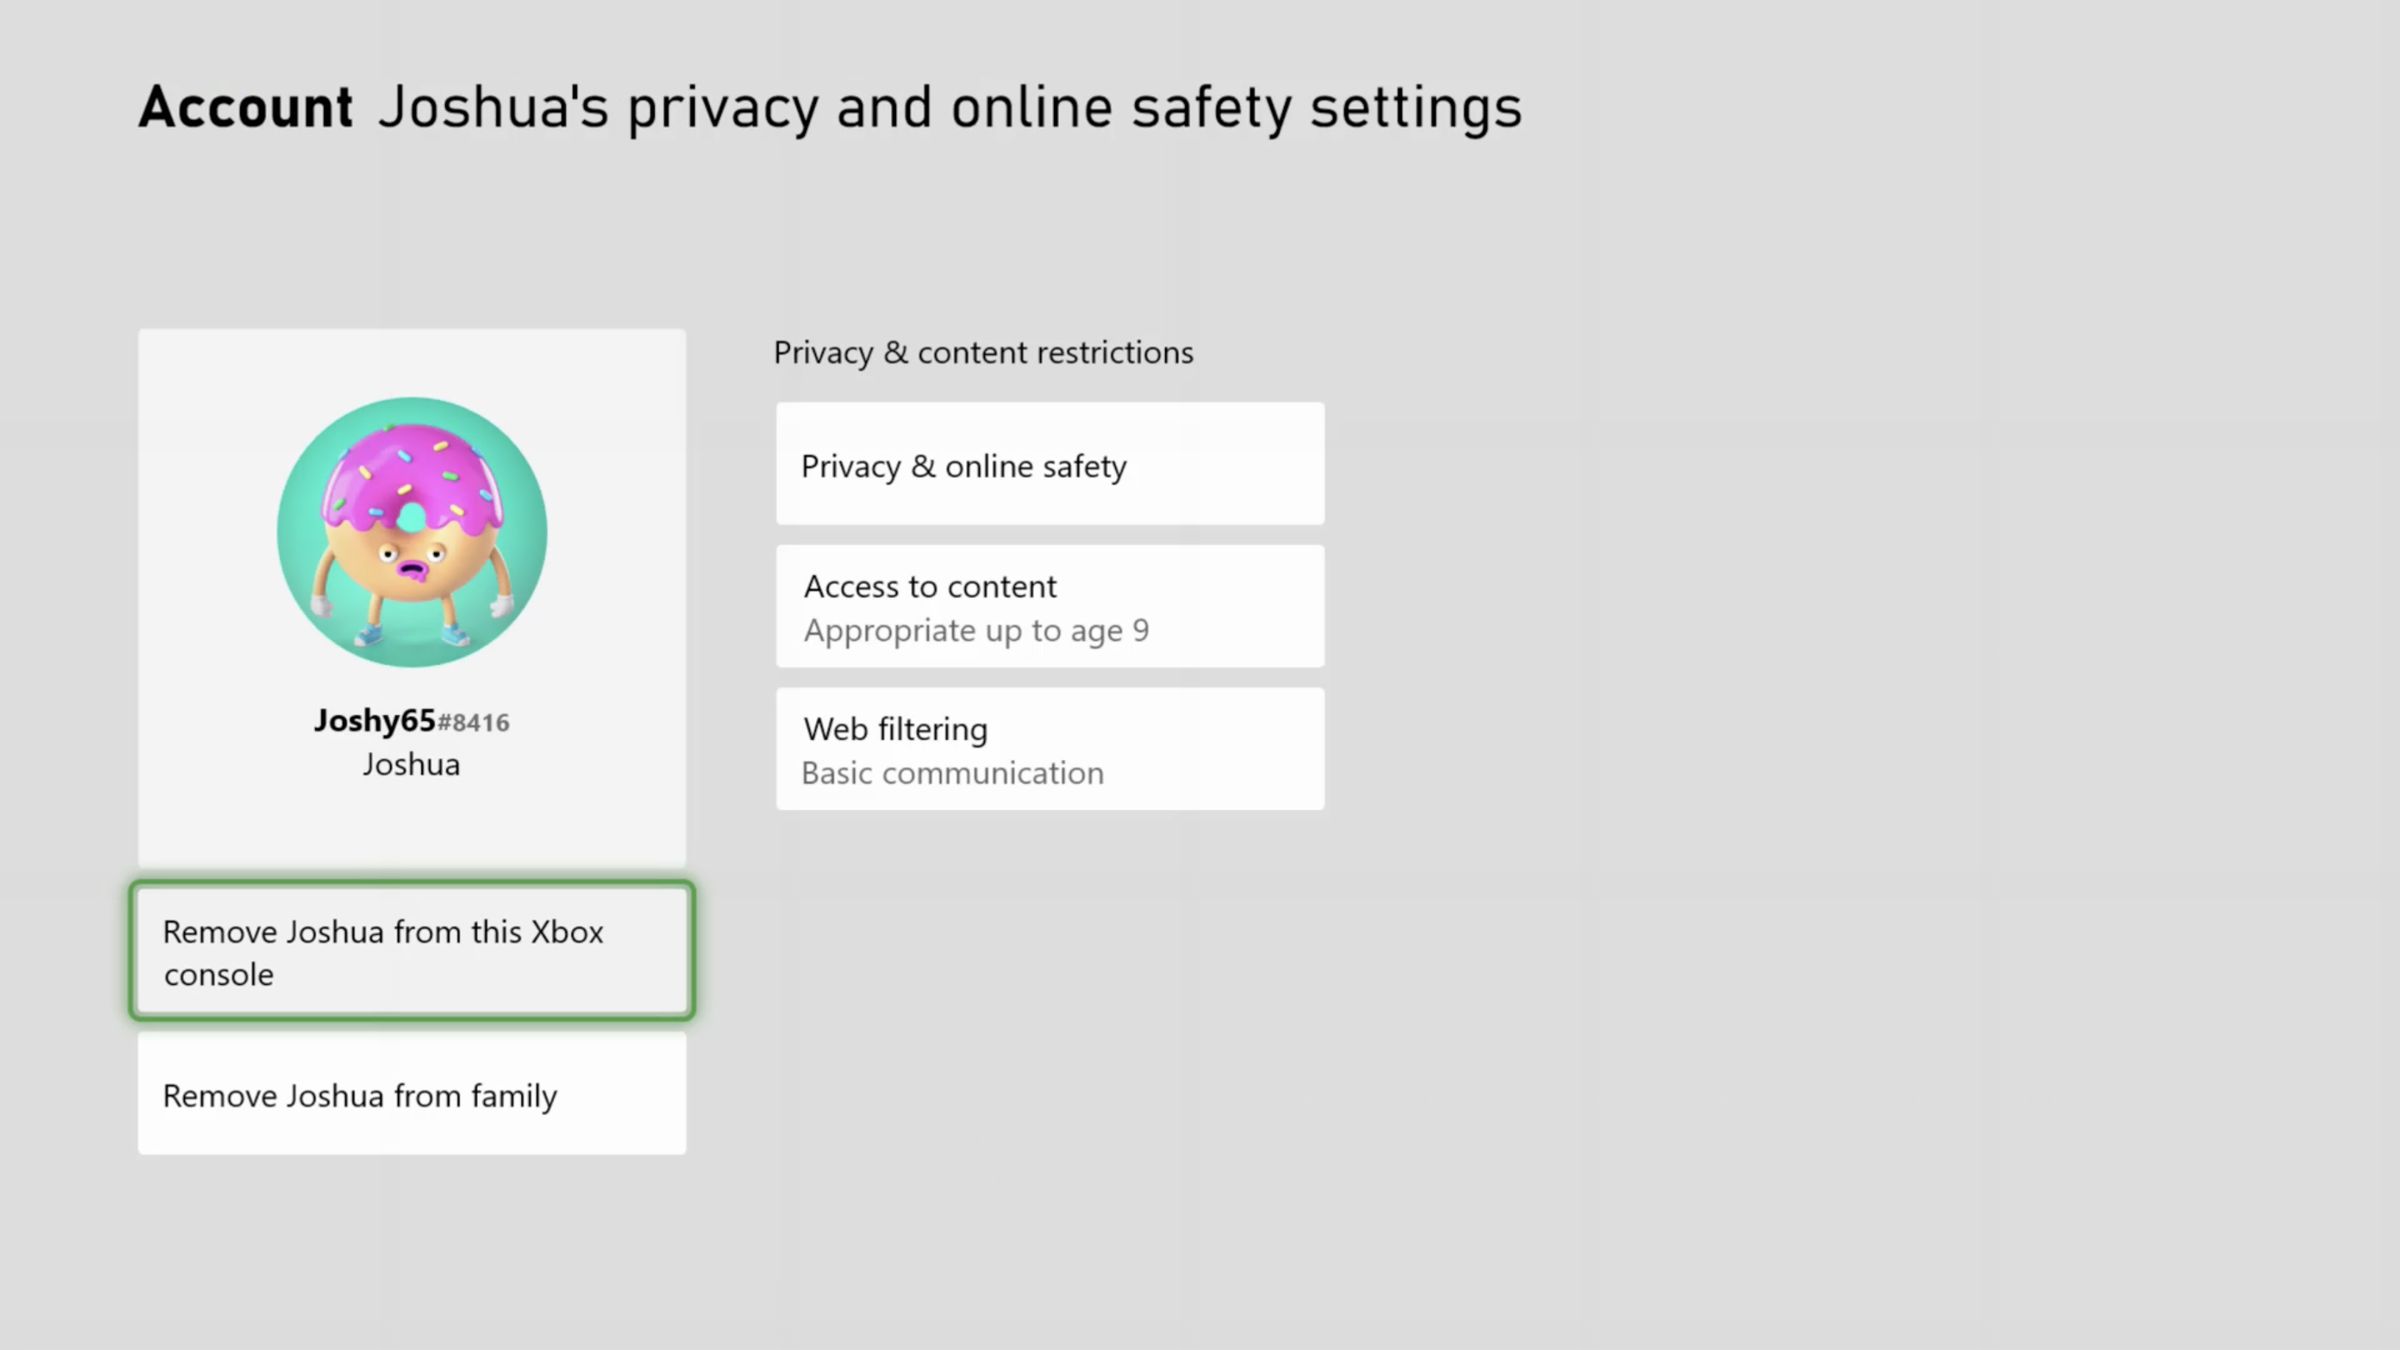 page headed “Account Joshua’s privacy and online safety settings” below that a box with an animated cupcake drawing labeled Joshy65 and a highlight around “Remove Joshua from this Xbox console” and another column labeled “Privacy &amp; content restrictions” with three menu choices.